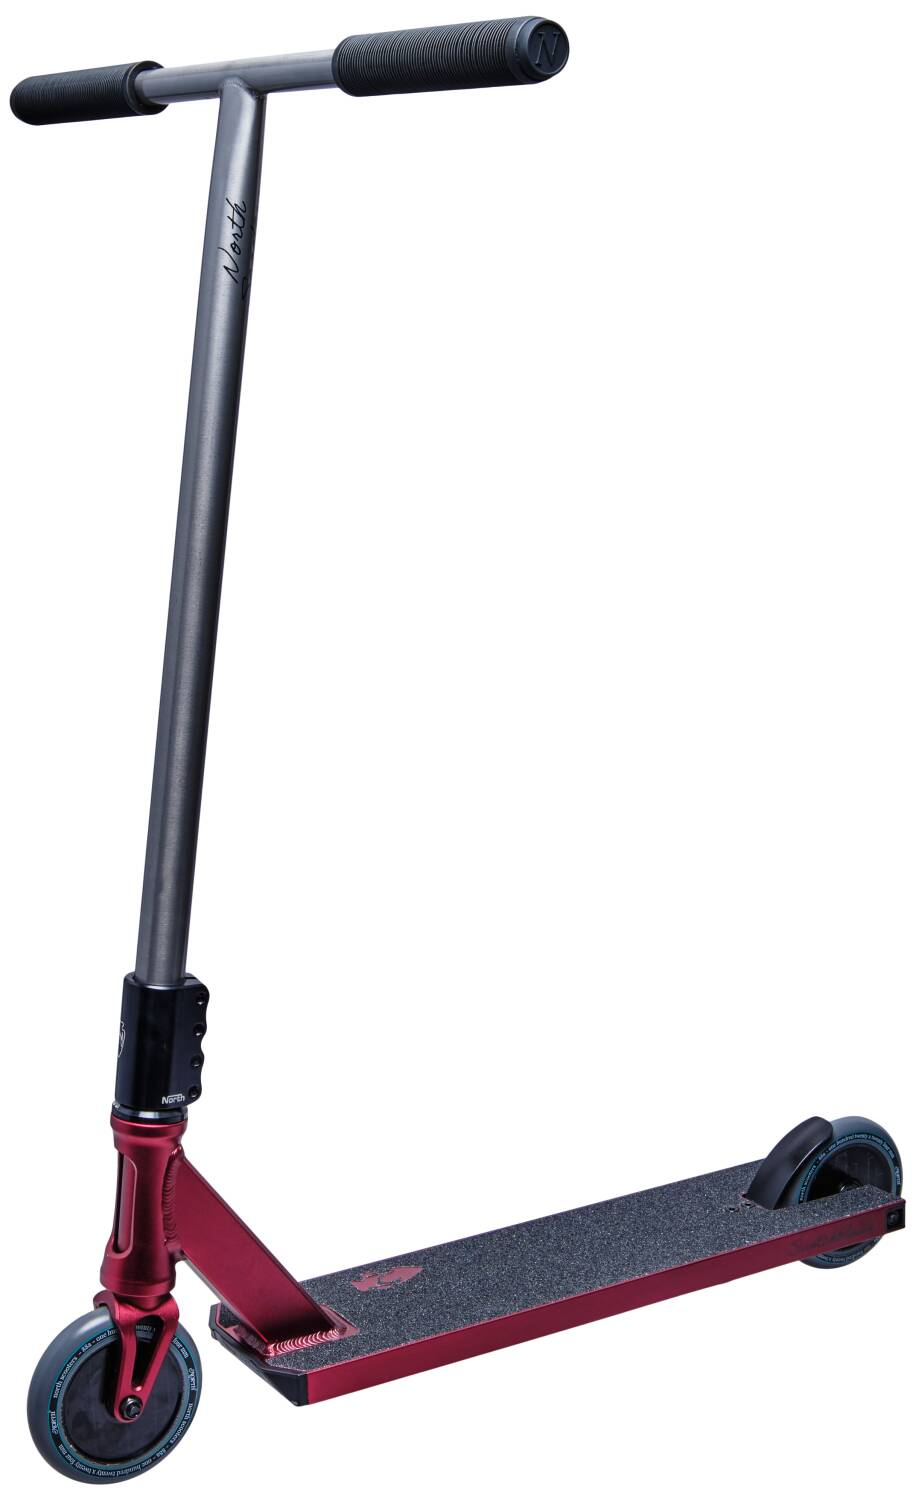 North Switchblade 2020 Pro Scooter